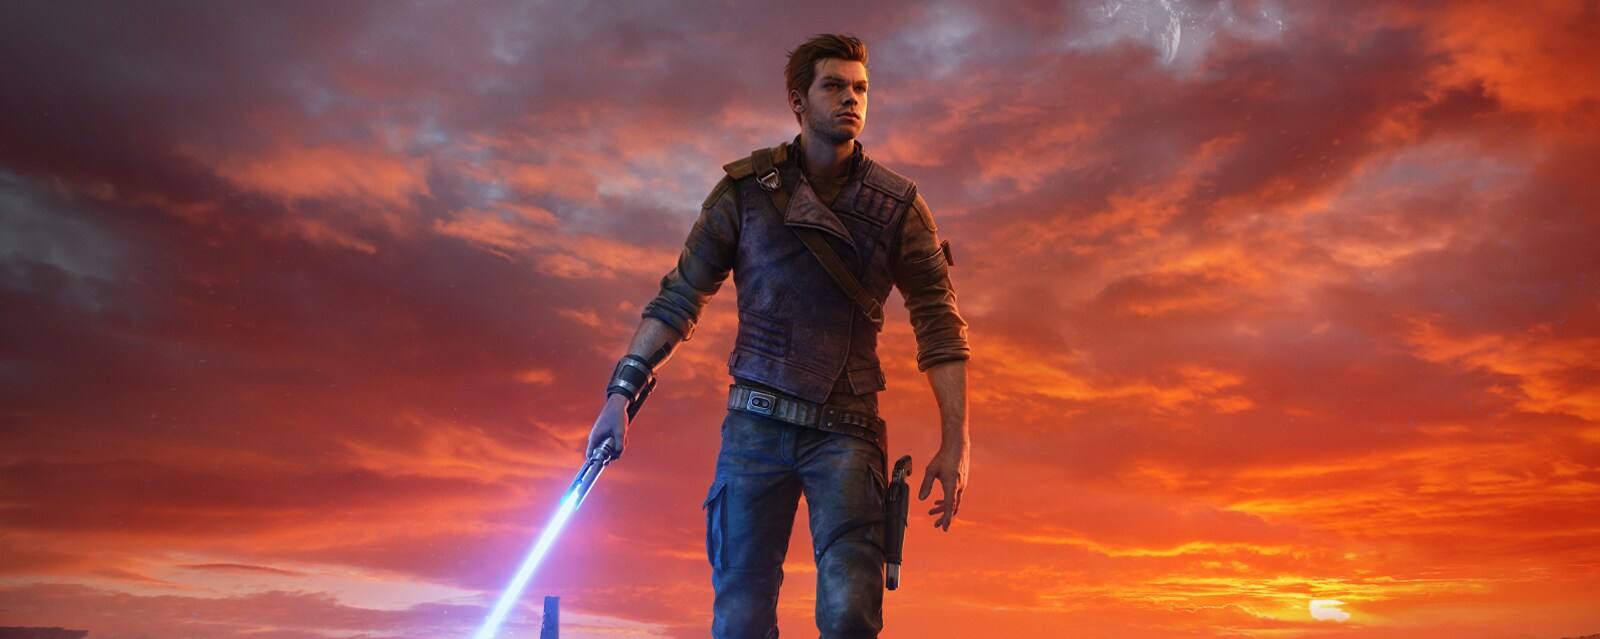 STAR WARS Jedi: Survivor™ – Available now on PC, PlayStation and Xbox –  Electronic Arts